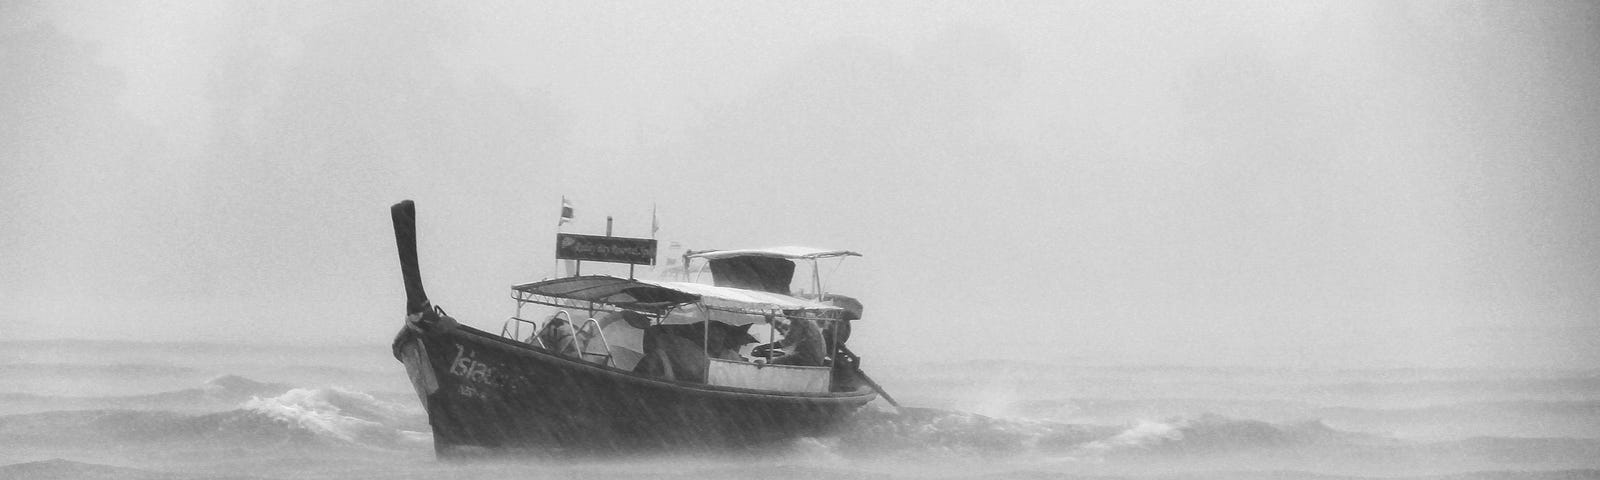 A small fishing boat is caught in a rain storm at sea.